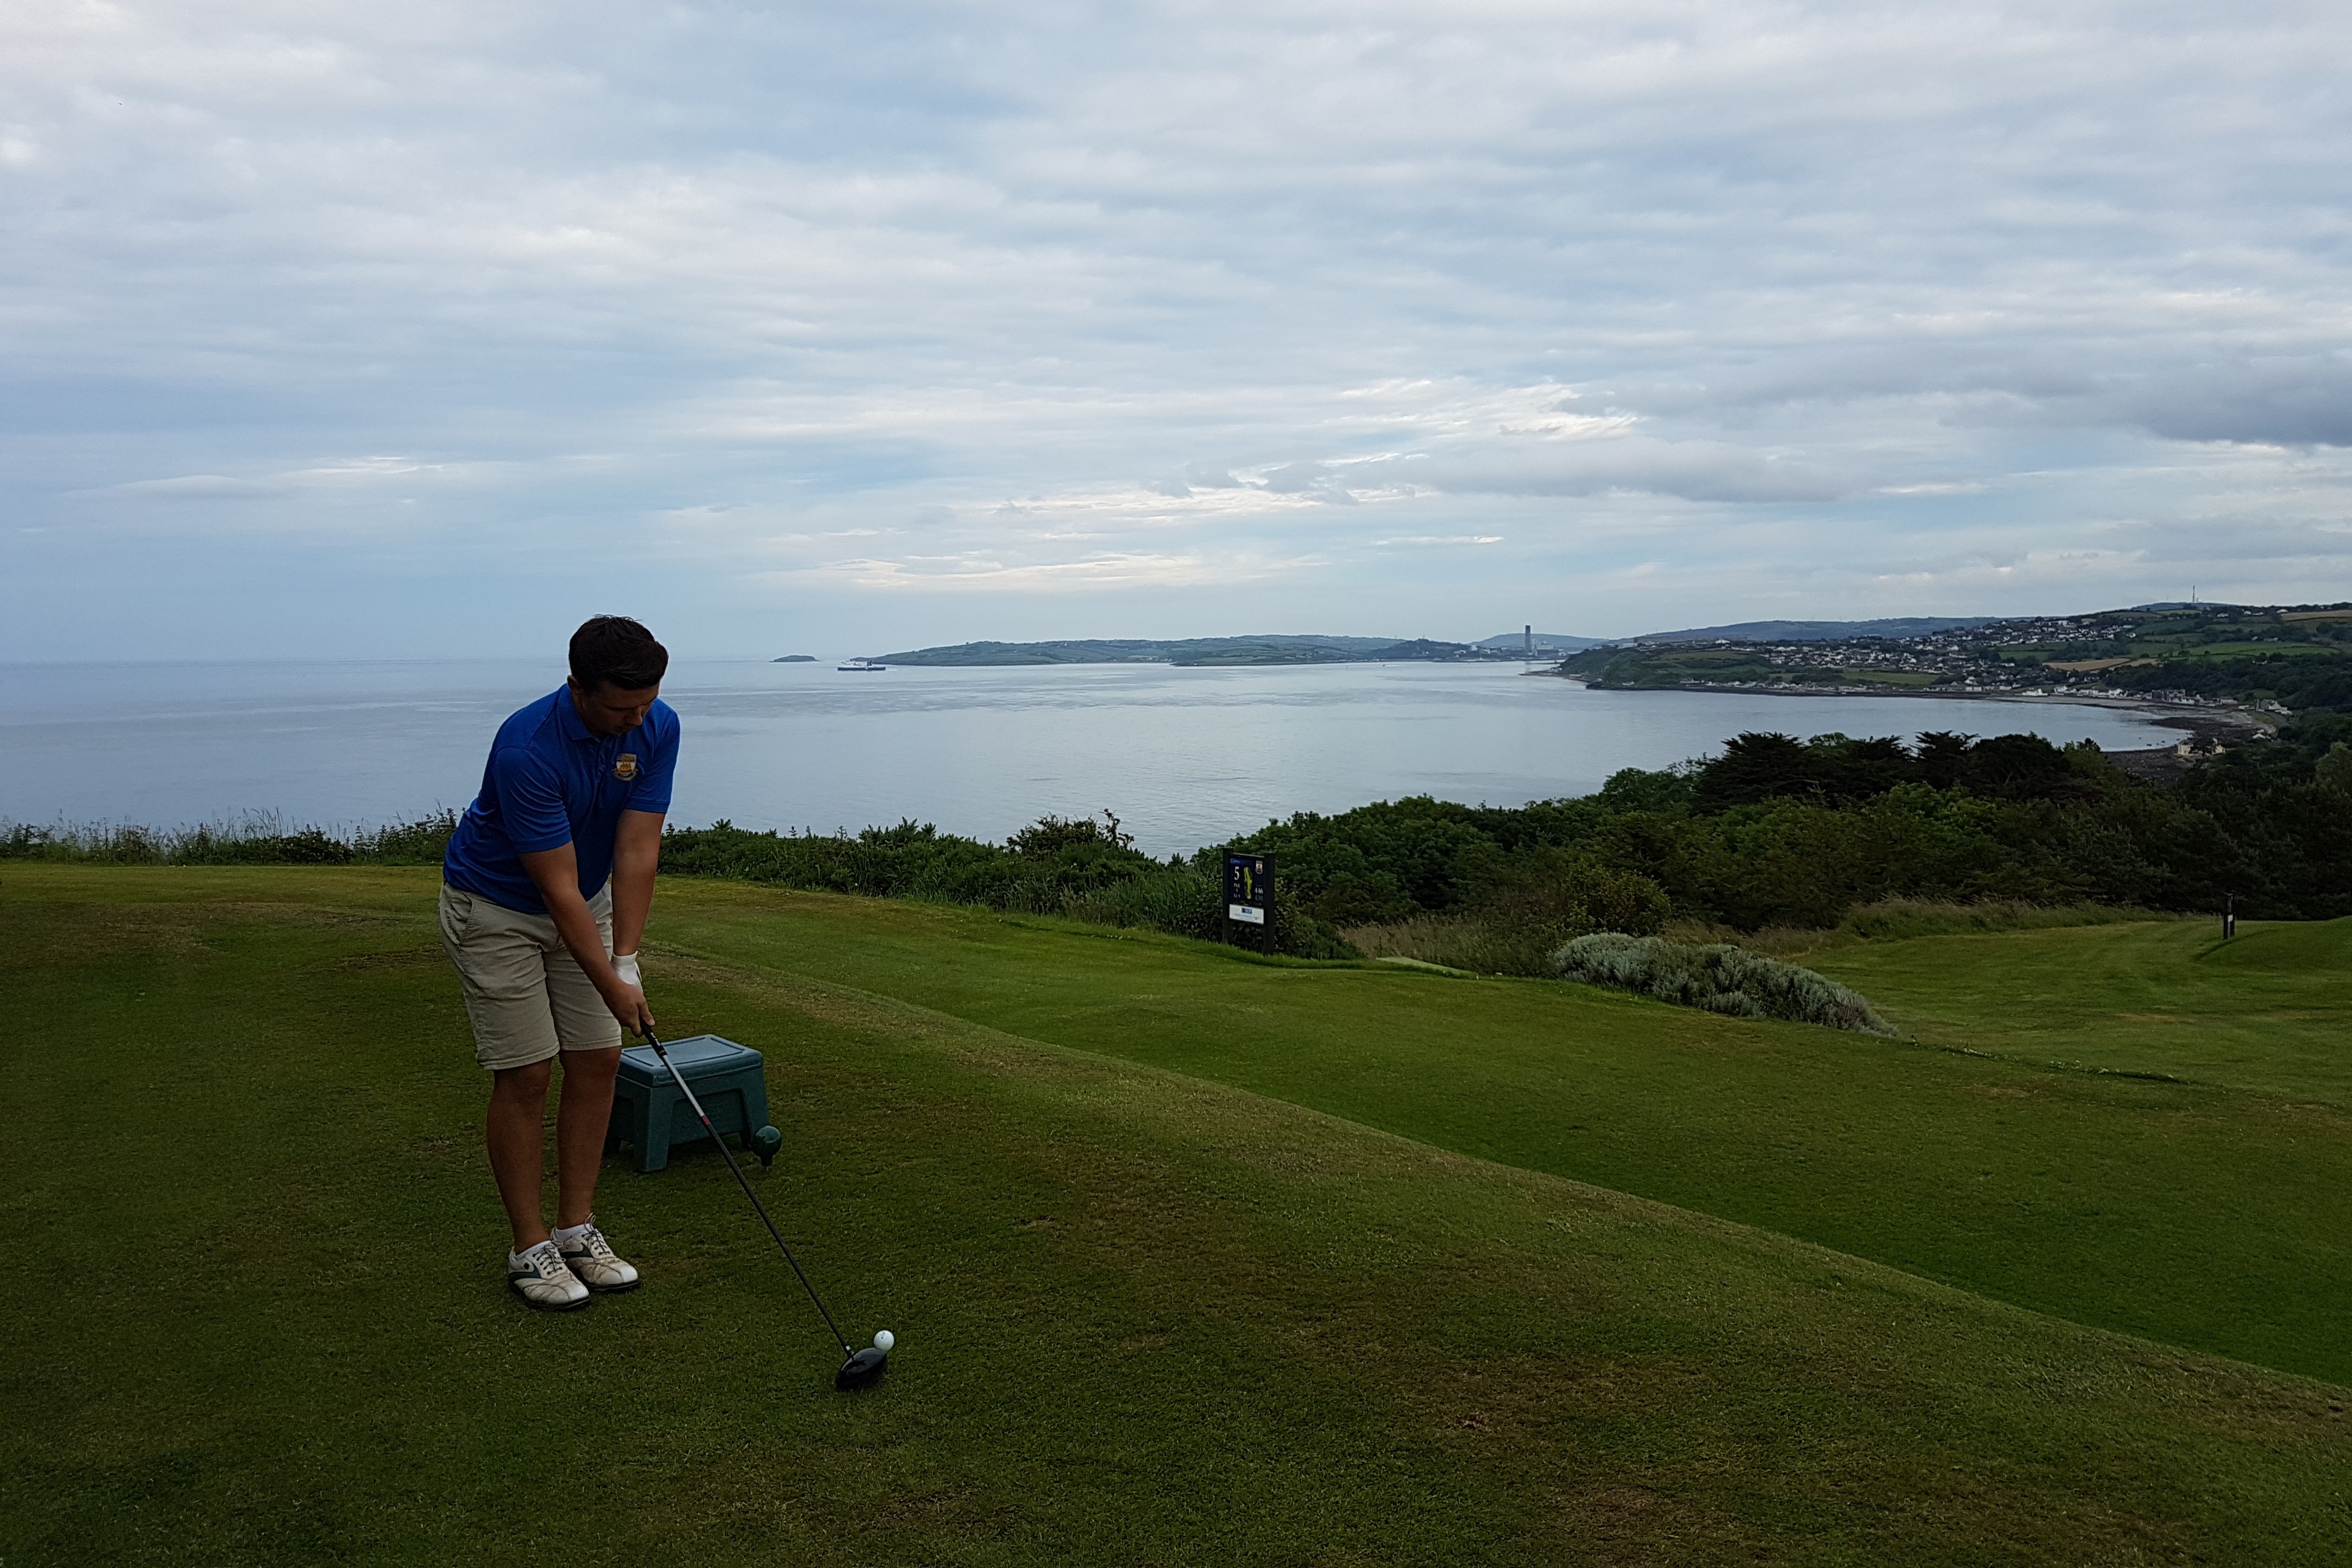 Teeing off on the 5th, with Islandmagee, Larne Golf Club and Larne in the distance